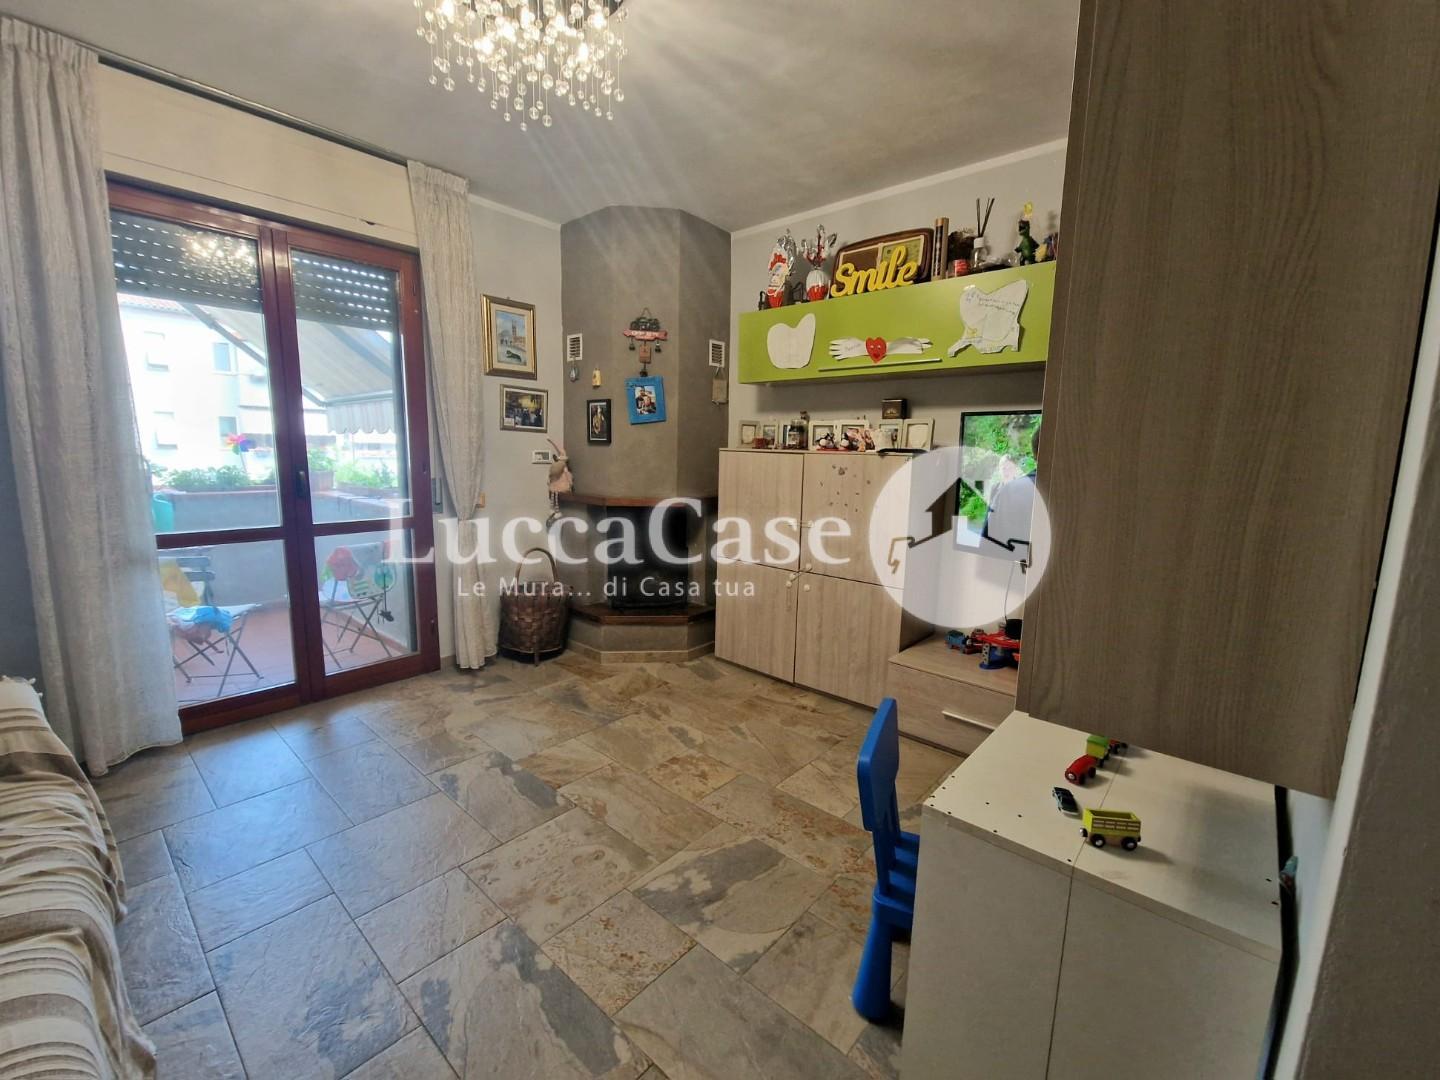 Apartment for sale, ref. n042C